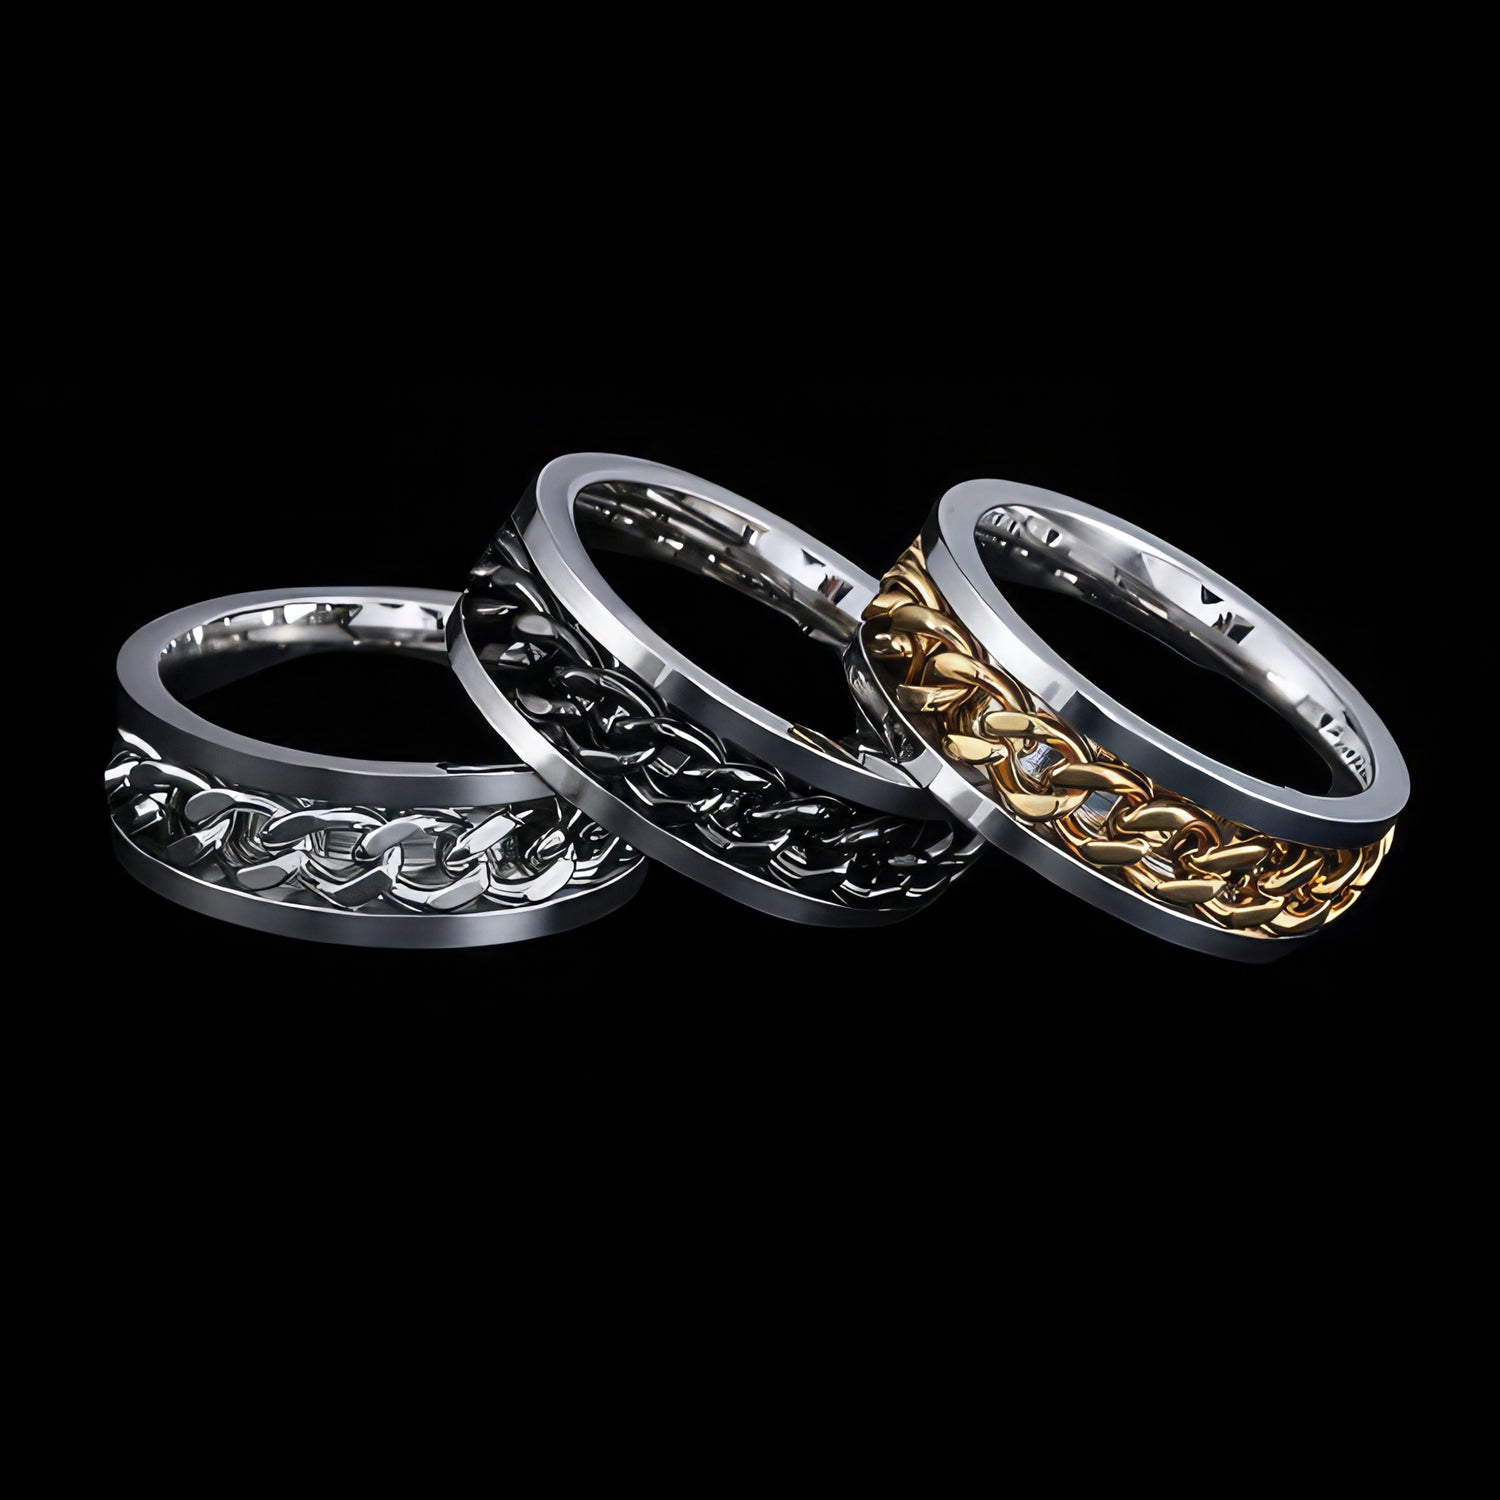 Aite Babe Men Chain ring 9mmWide body Rome cool India | Ubuy